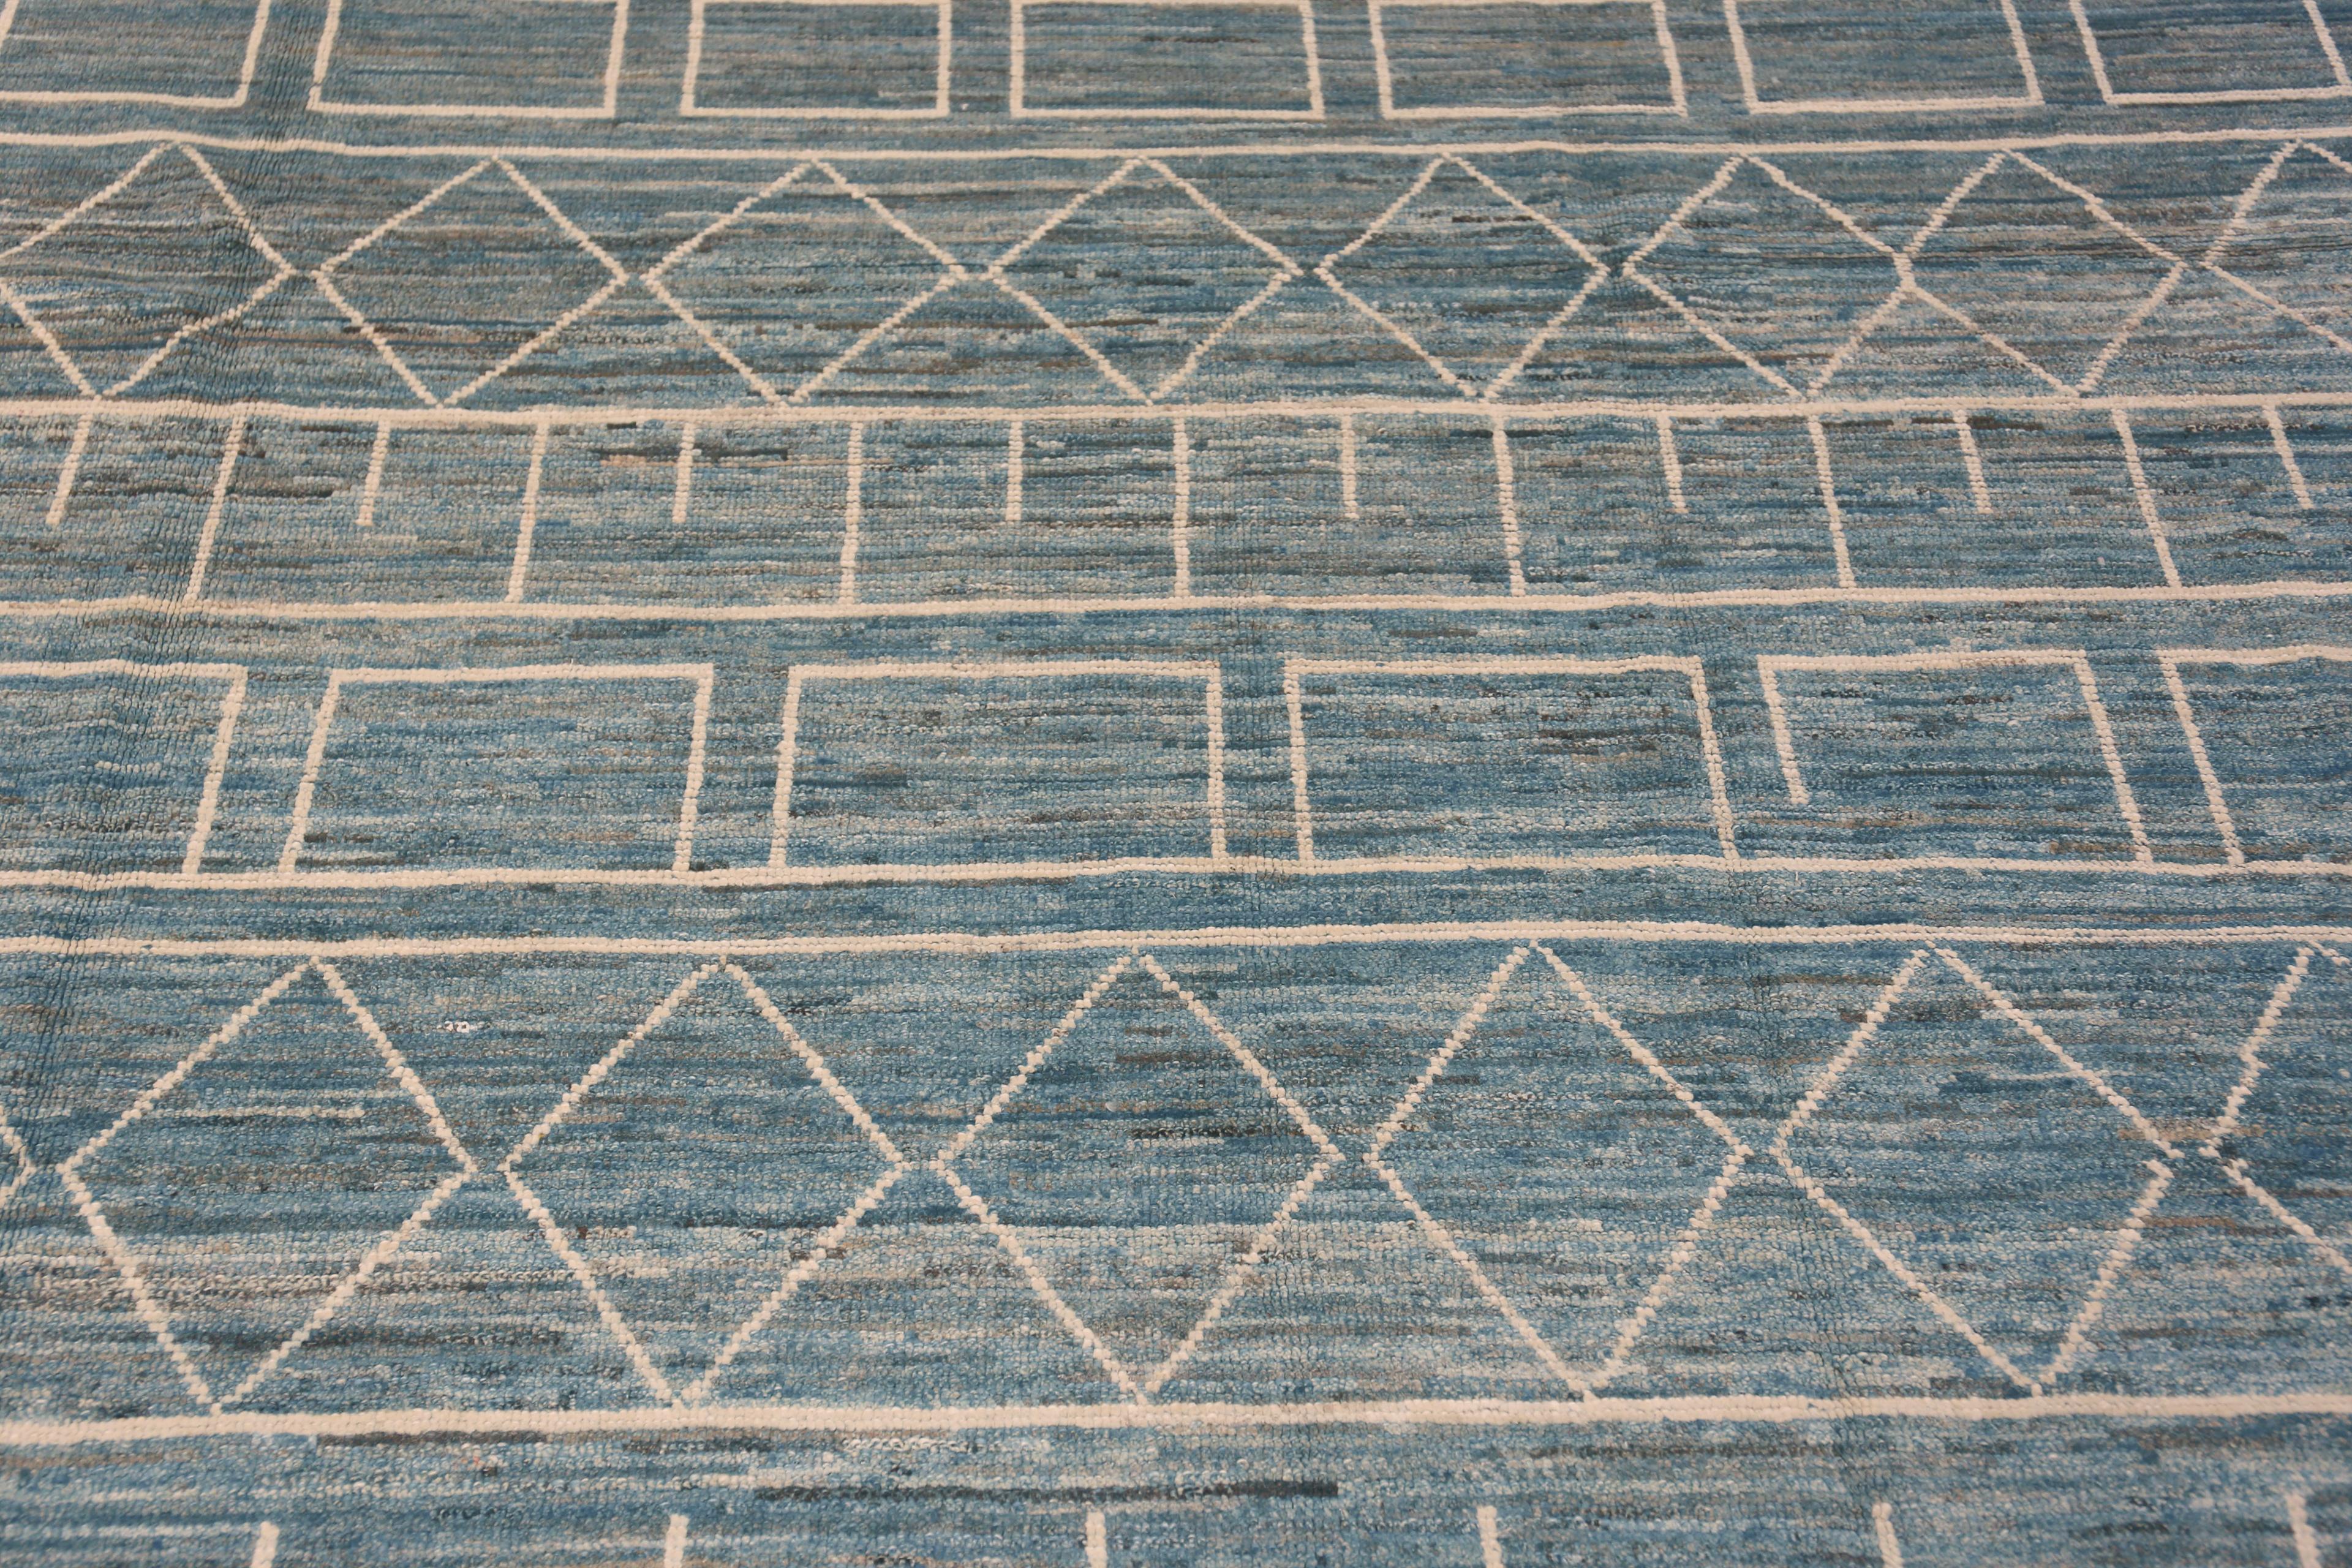 Central Asian Nazmiyal Collection Modern Geometric Light Blue Tribal Area Rug 8'7